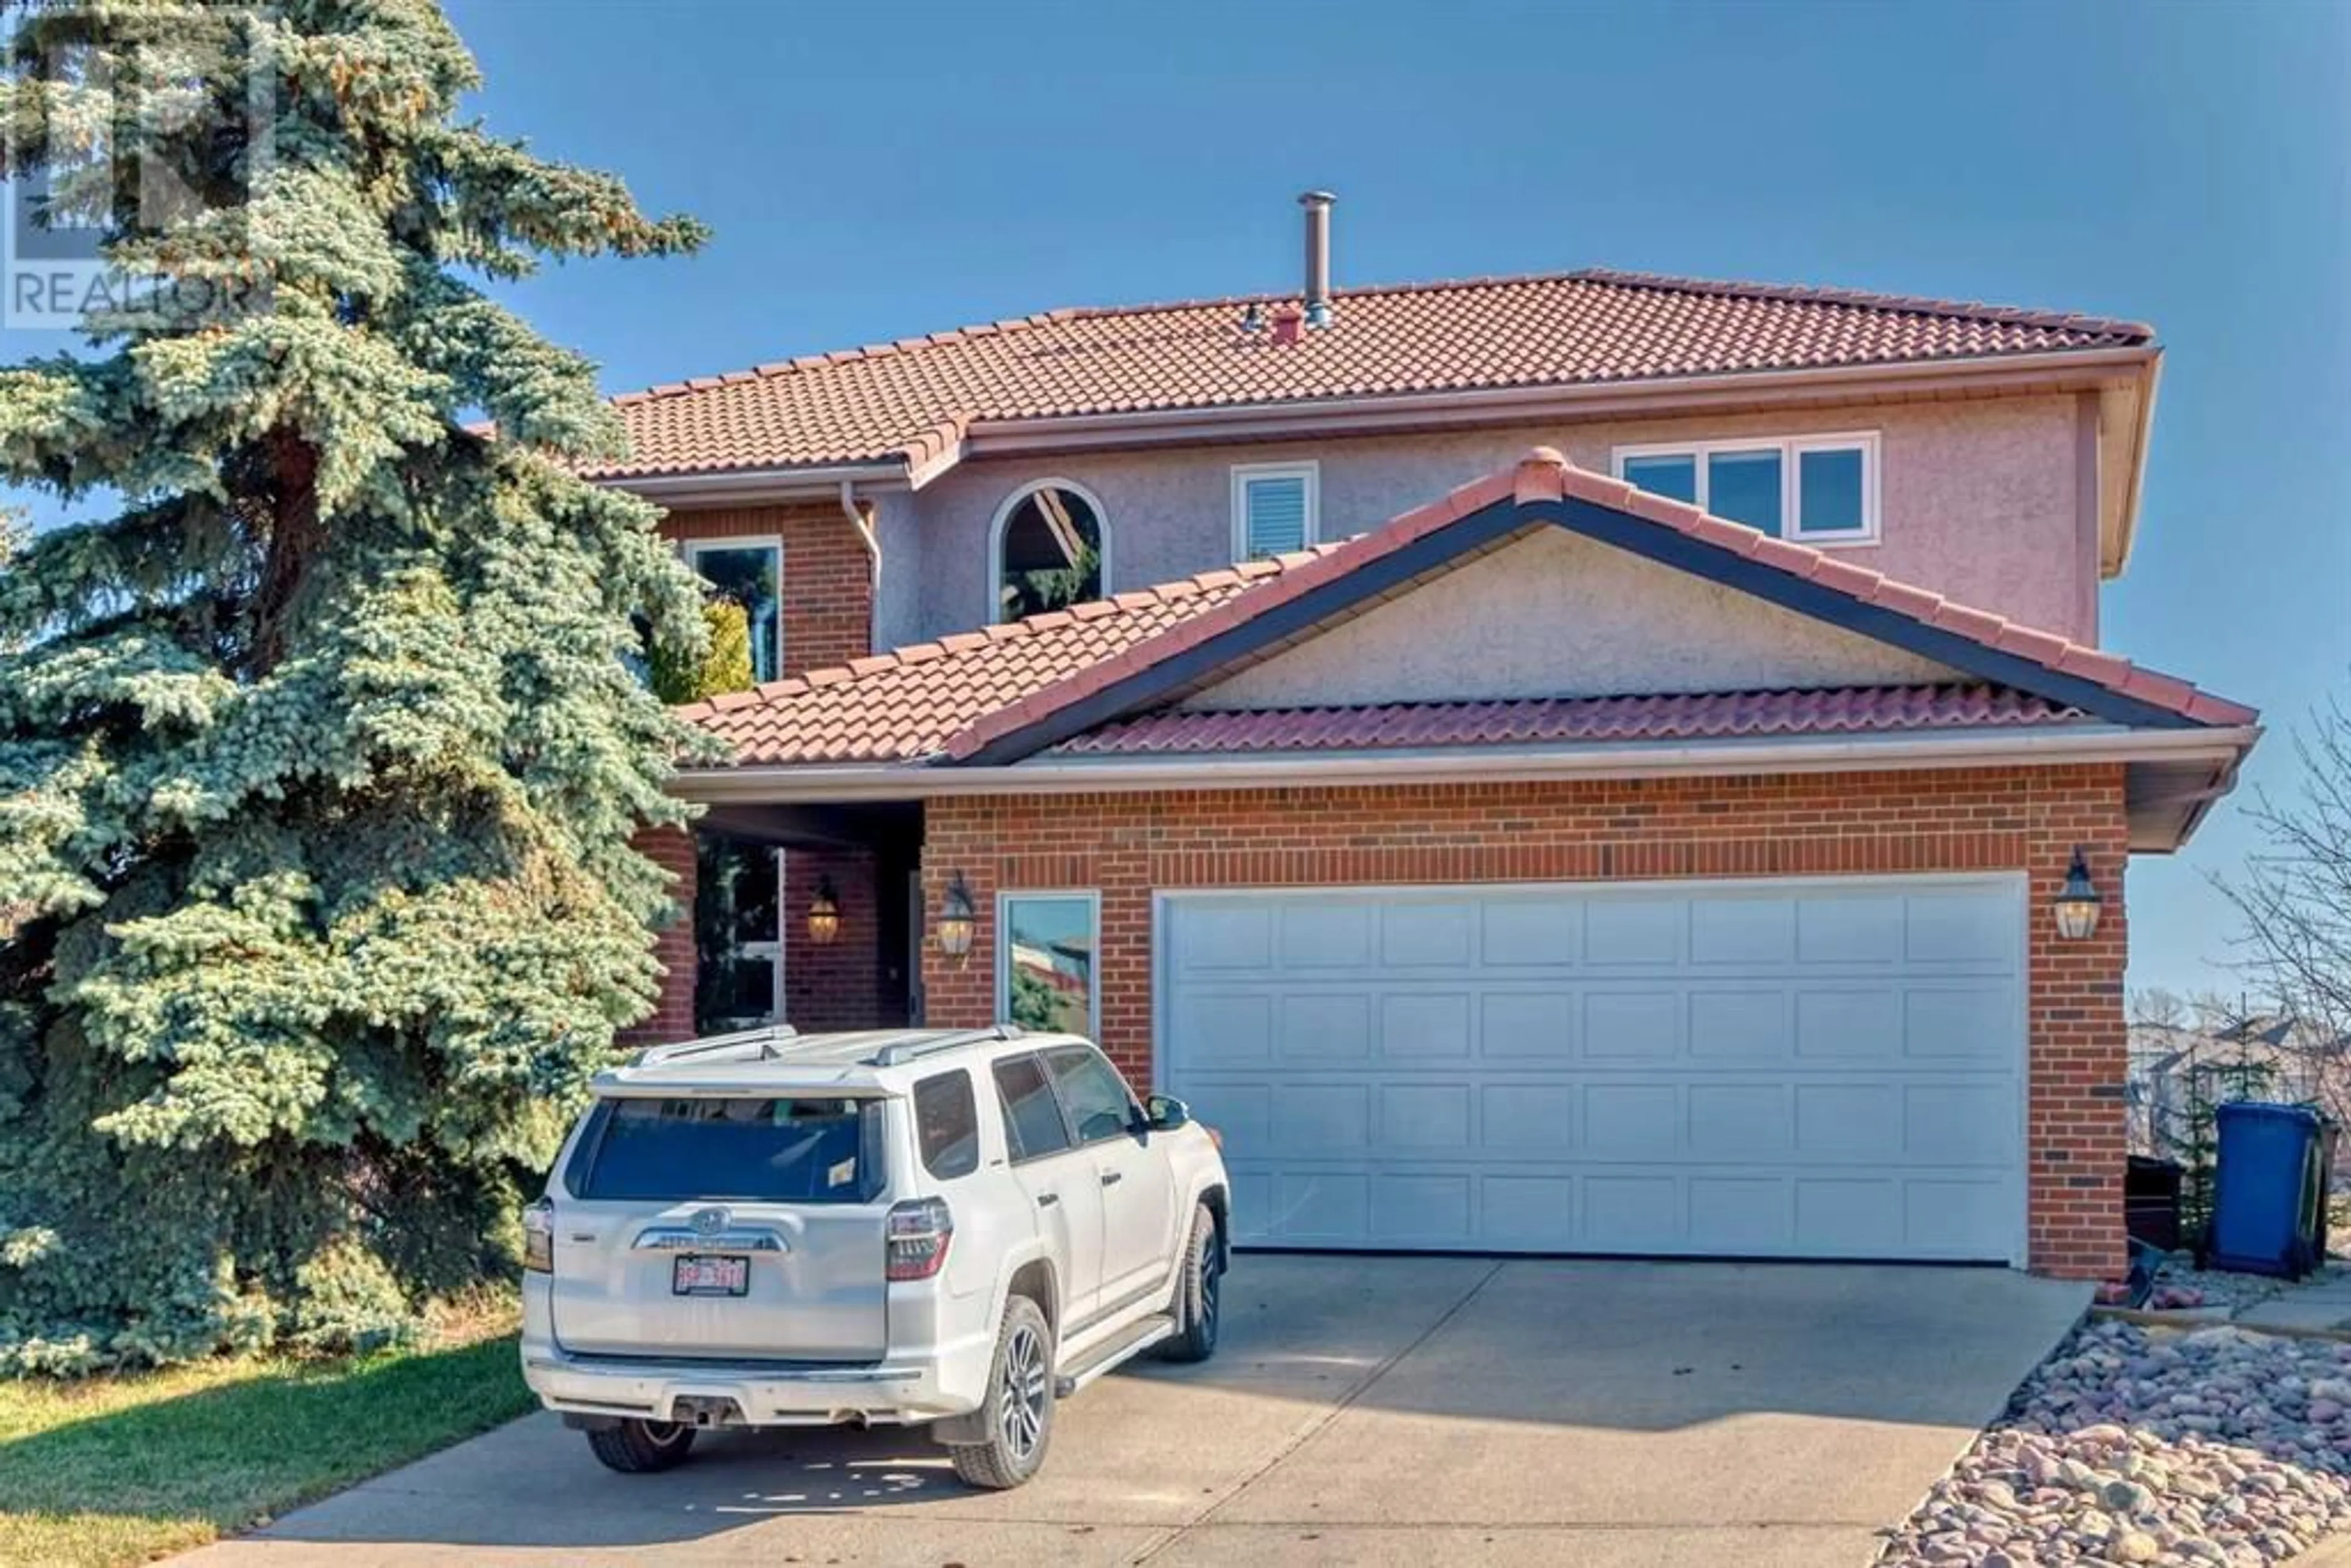 Home with brick exterior material for 47 Edgeridge Court NW, Calgary Alberta T3A4P1